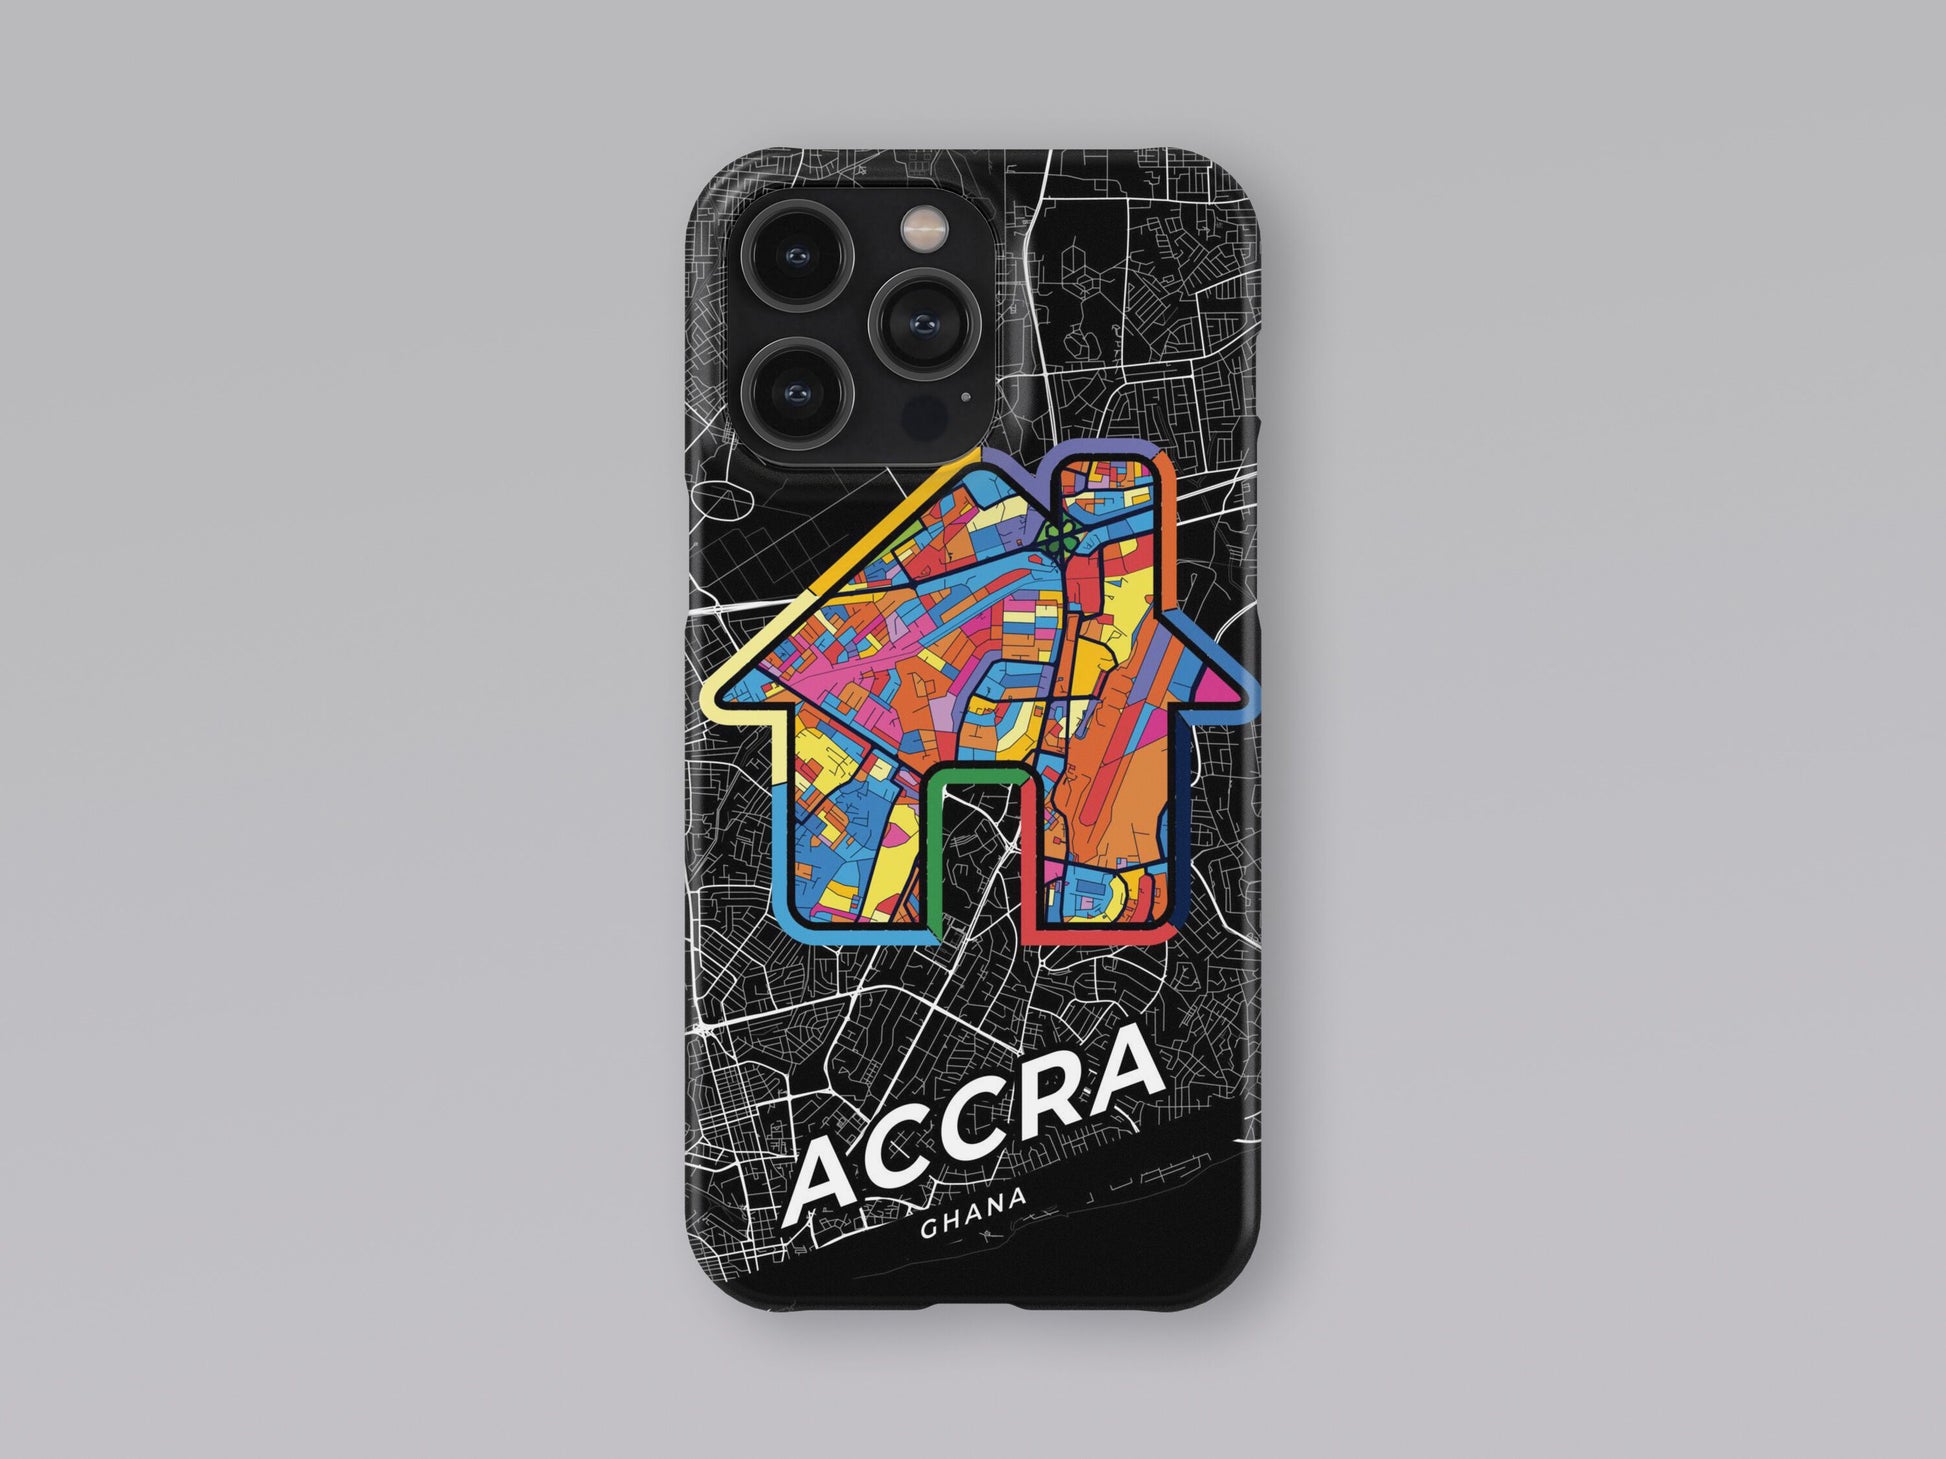 Accra Ghana slim phone case with colorful icon. Birthday, wedding or housewarming gift. Couple match cases. 3